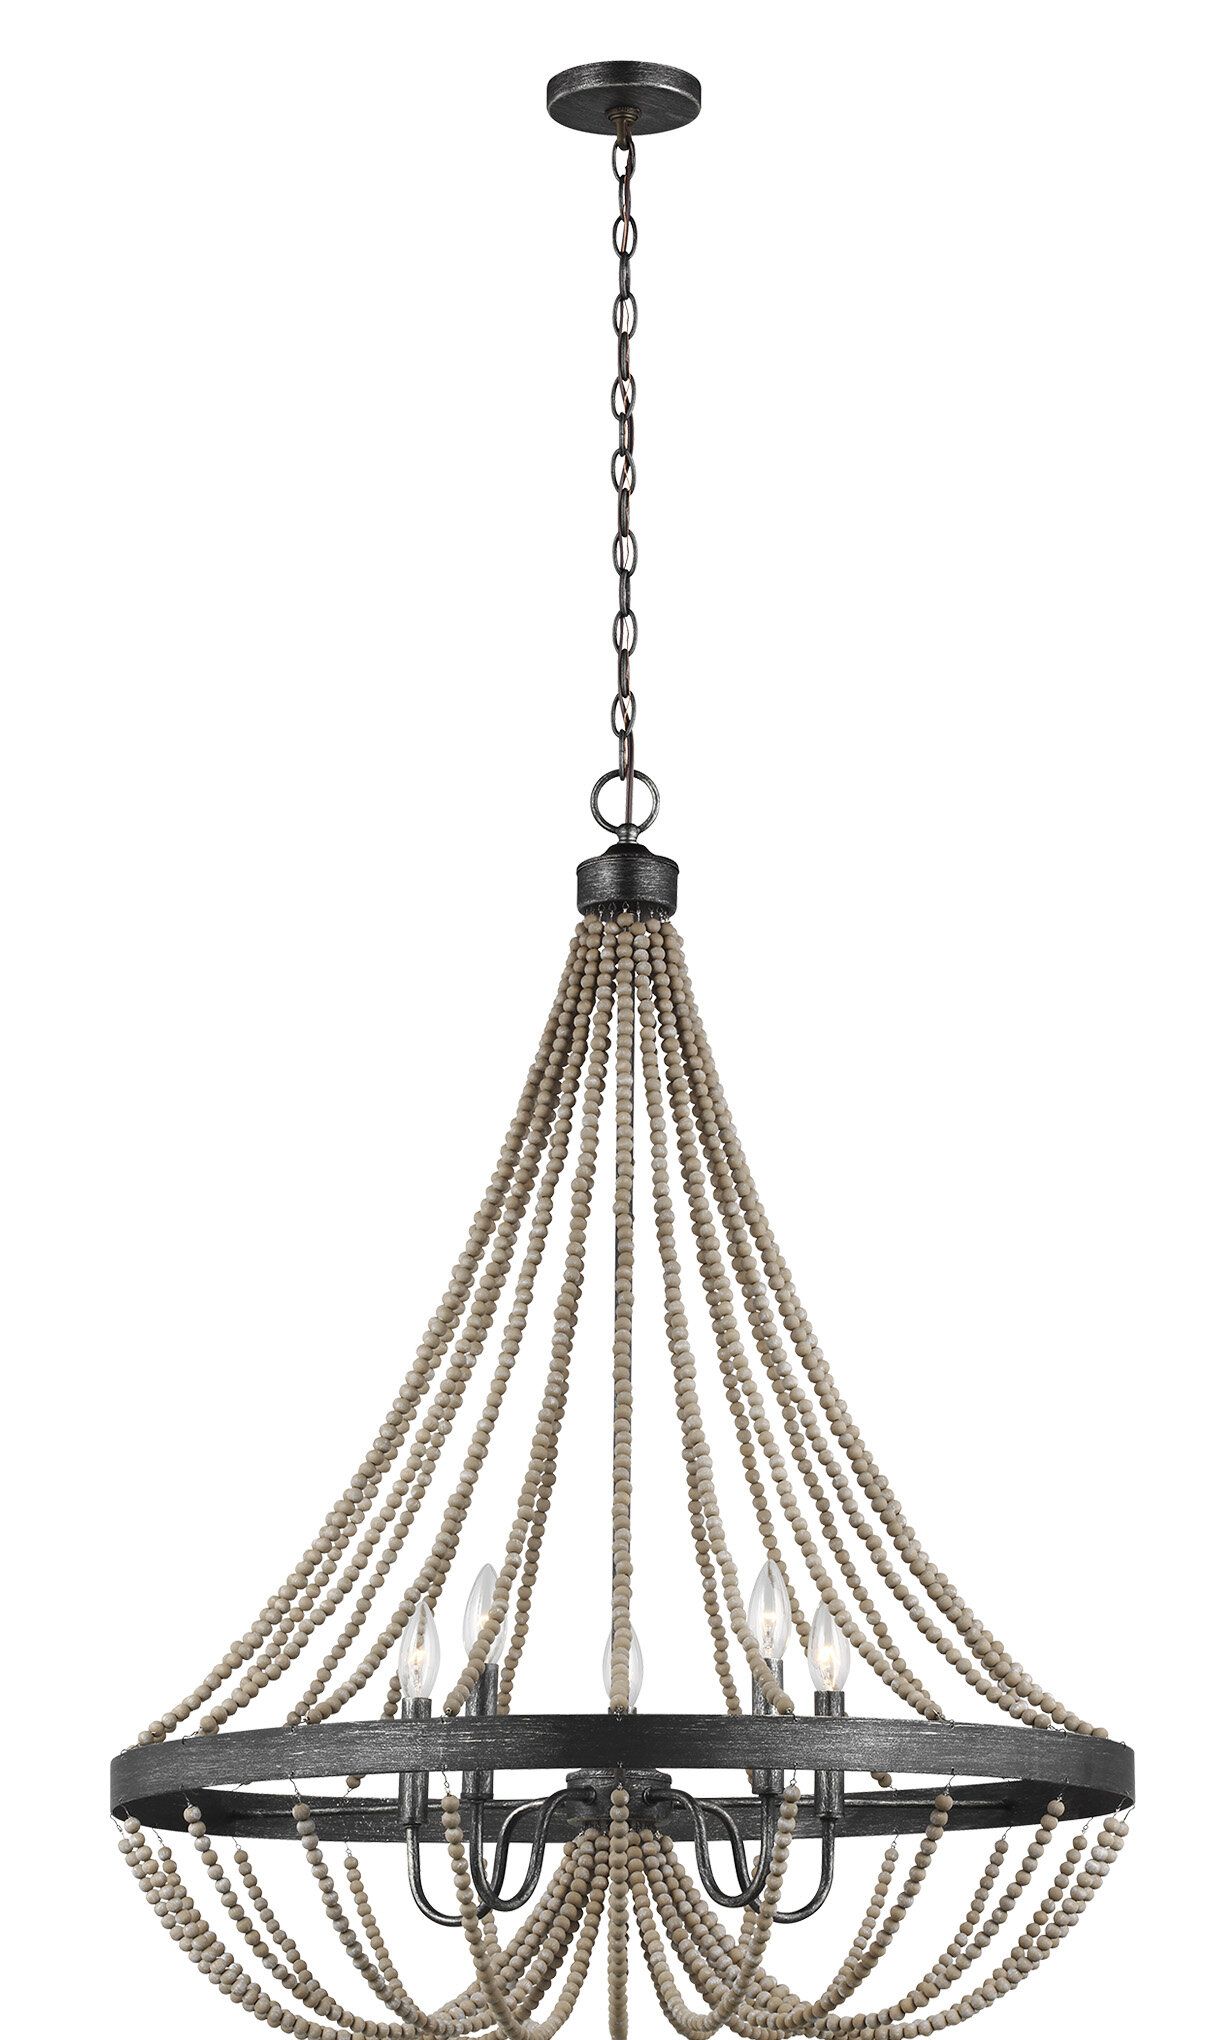 New Braunfels 5 Light Empire Chandelier Pertaining To Ladonna 5 Light Novelty Chandeliers (View 3 of 30)